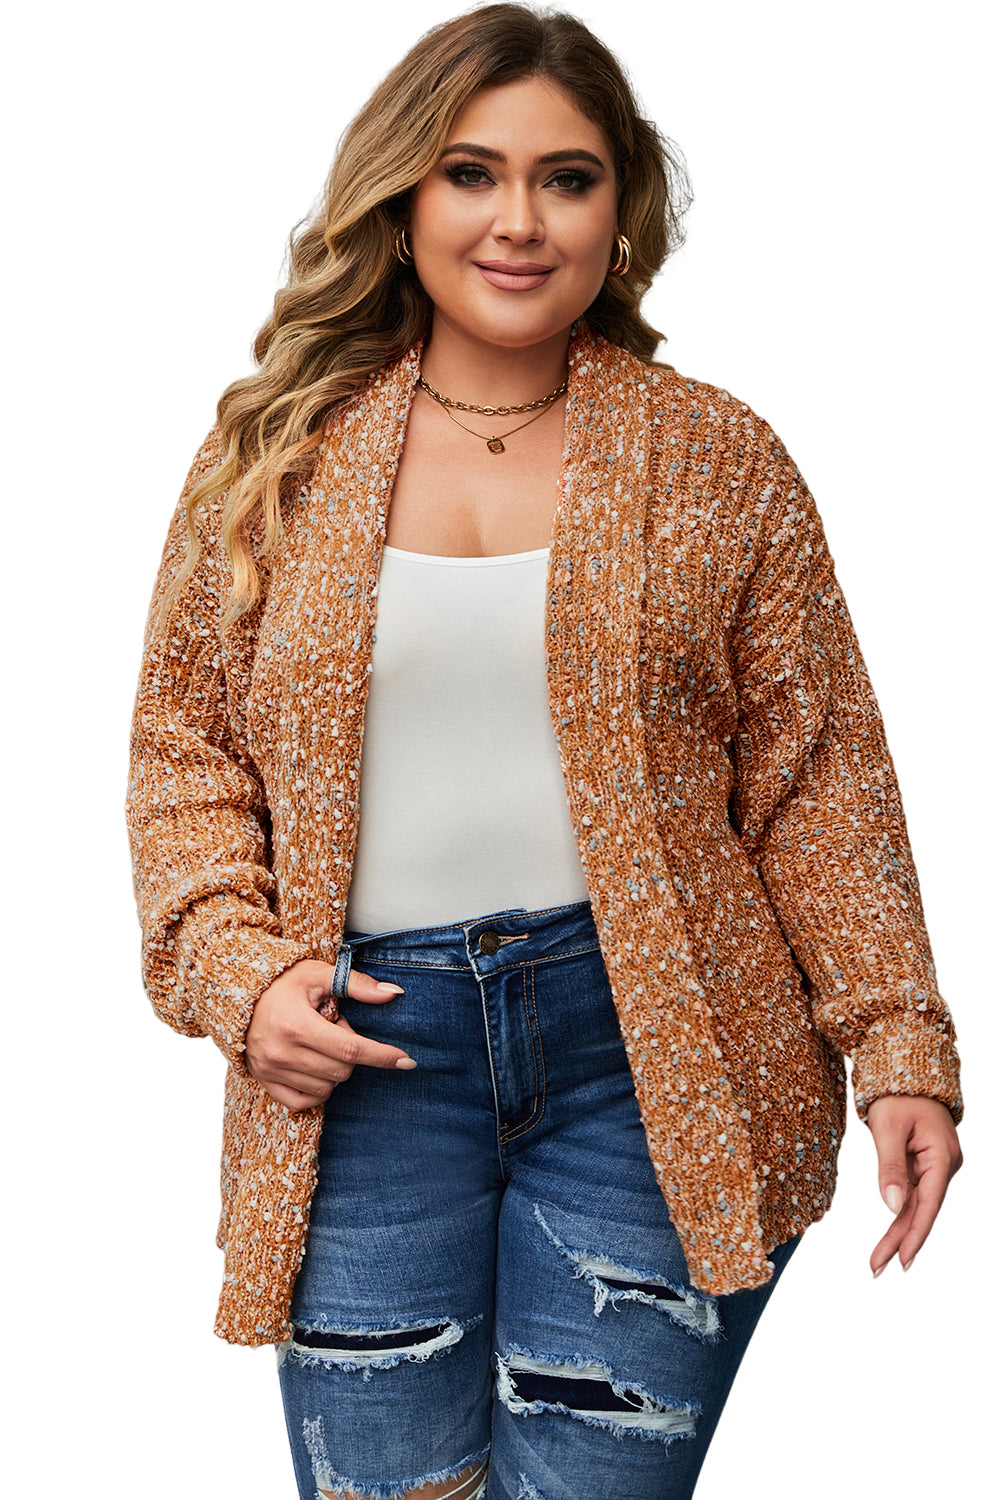 Chicory Coffee Open Front Knit Plus Size Cozy Cardigan